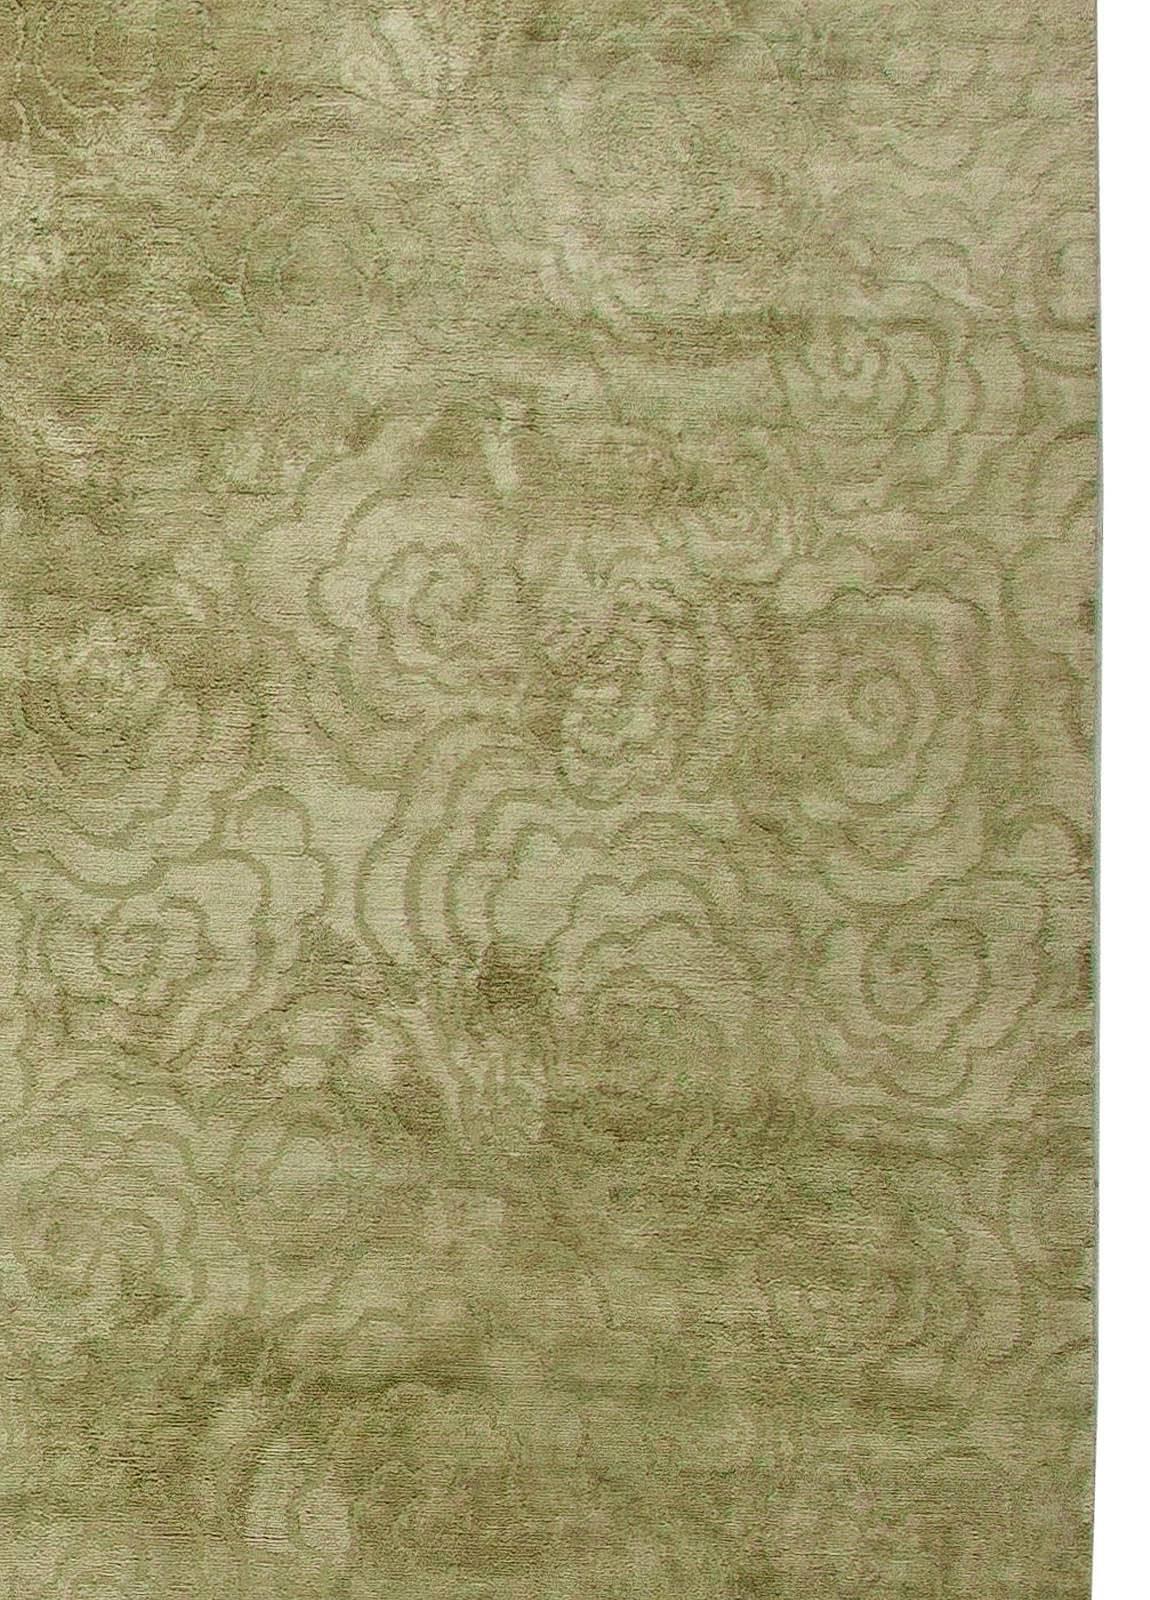 Contemporary Camelia Green Handmade Silk Rug by Doris Leslie Blau In New Condition For Sale In New York, NY